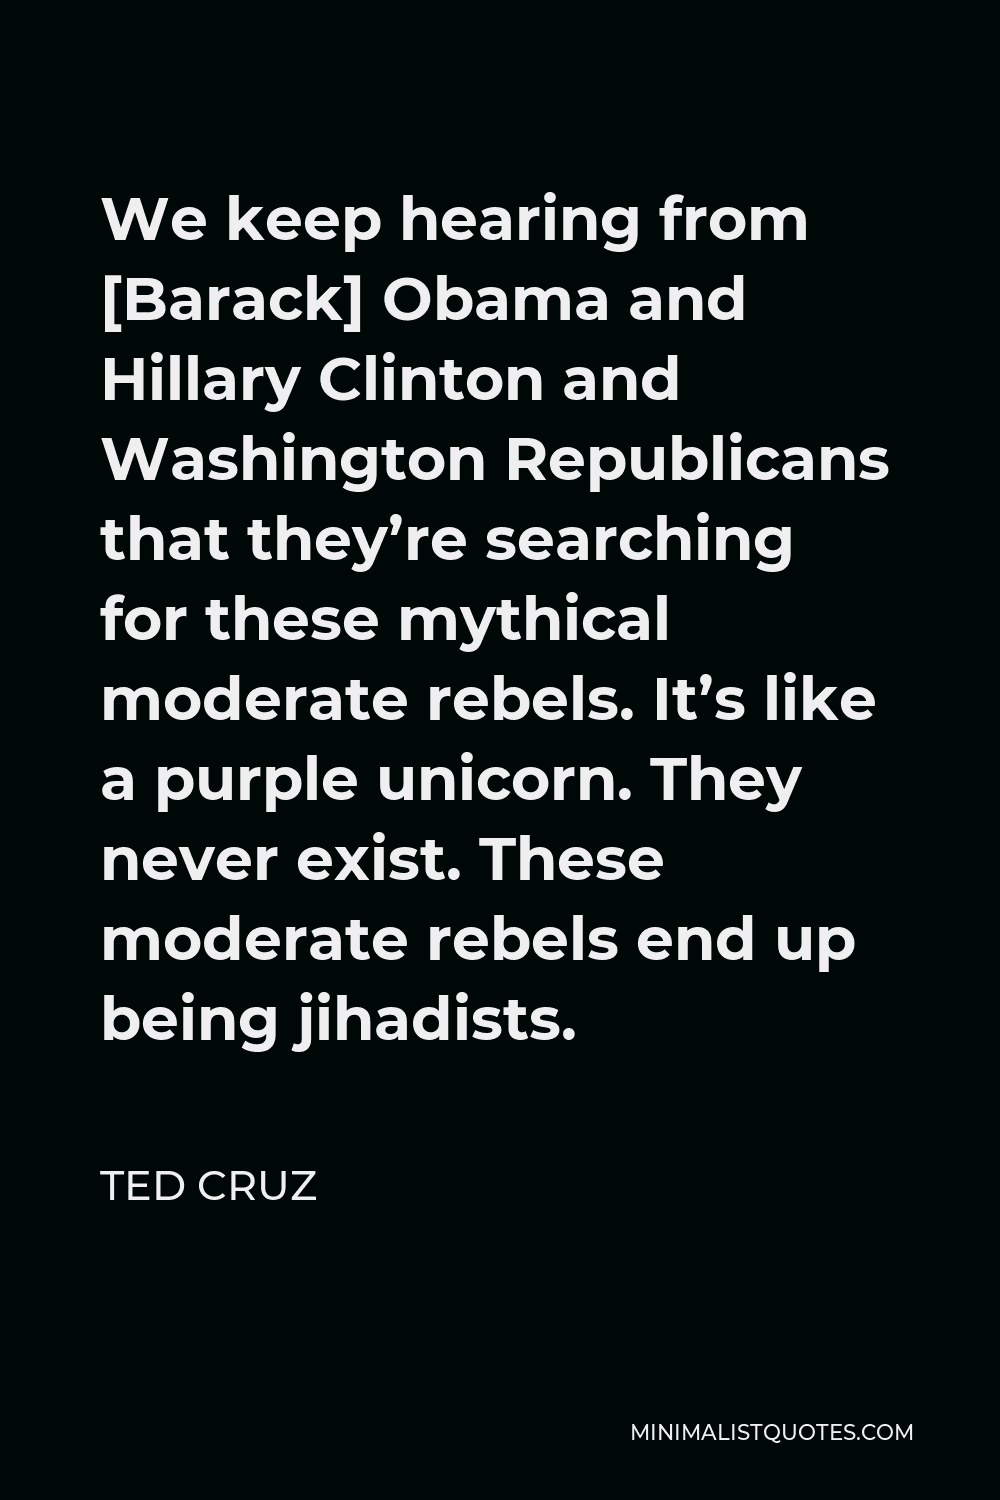 Ted Cruz Quote - We keep hearing from [Barack] Obama and Hillary Clinton and Washington Republicans that they’re searching for these mythical moderate rebels. It’s like a purple unicorn. They never exist. These moderate rebels end up being jihadists.